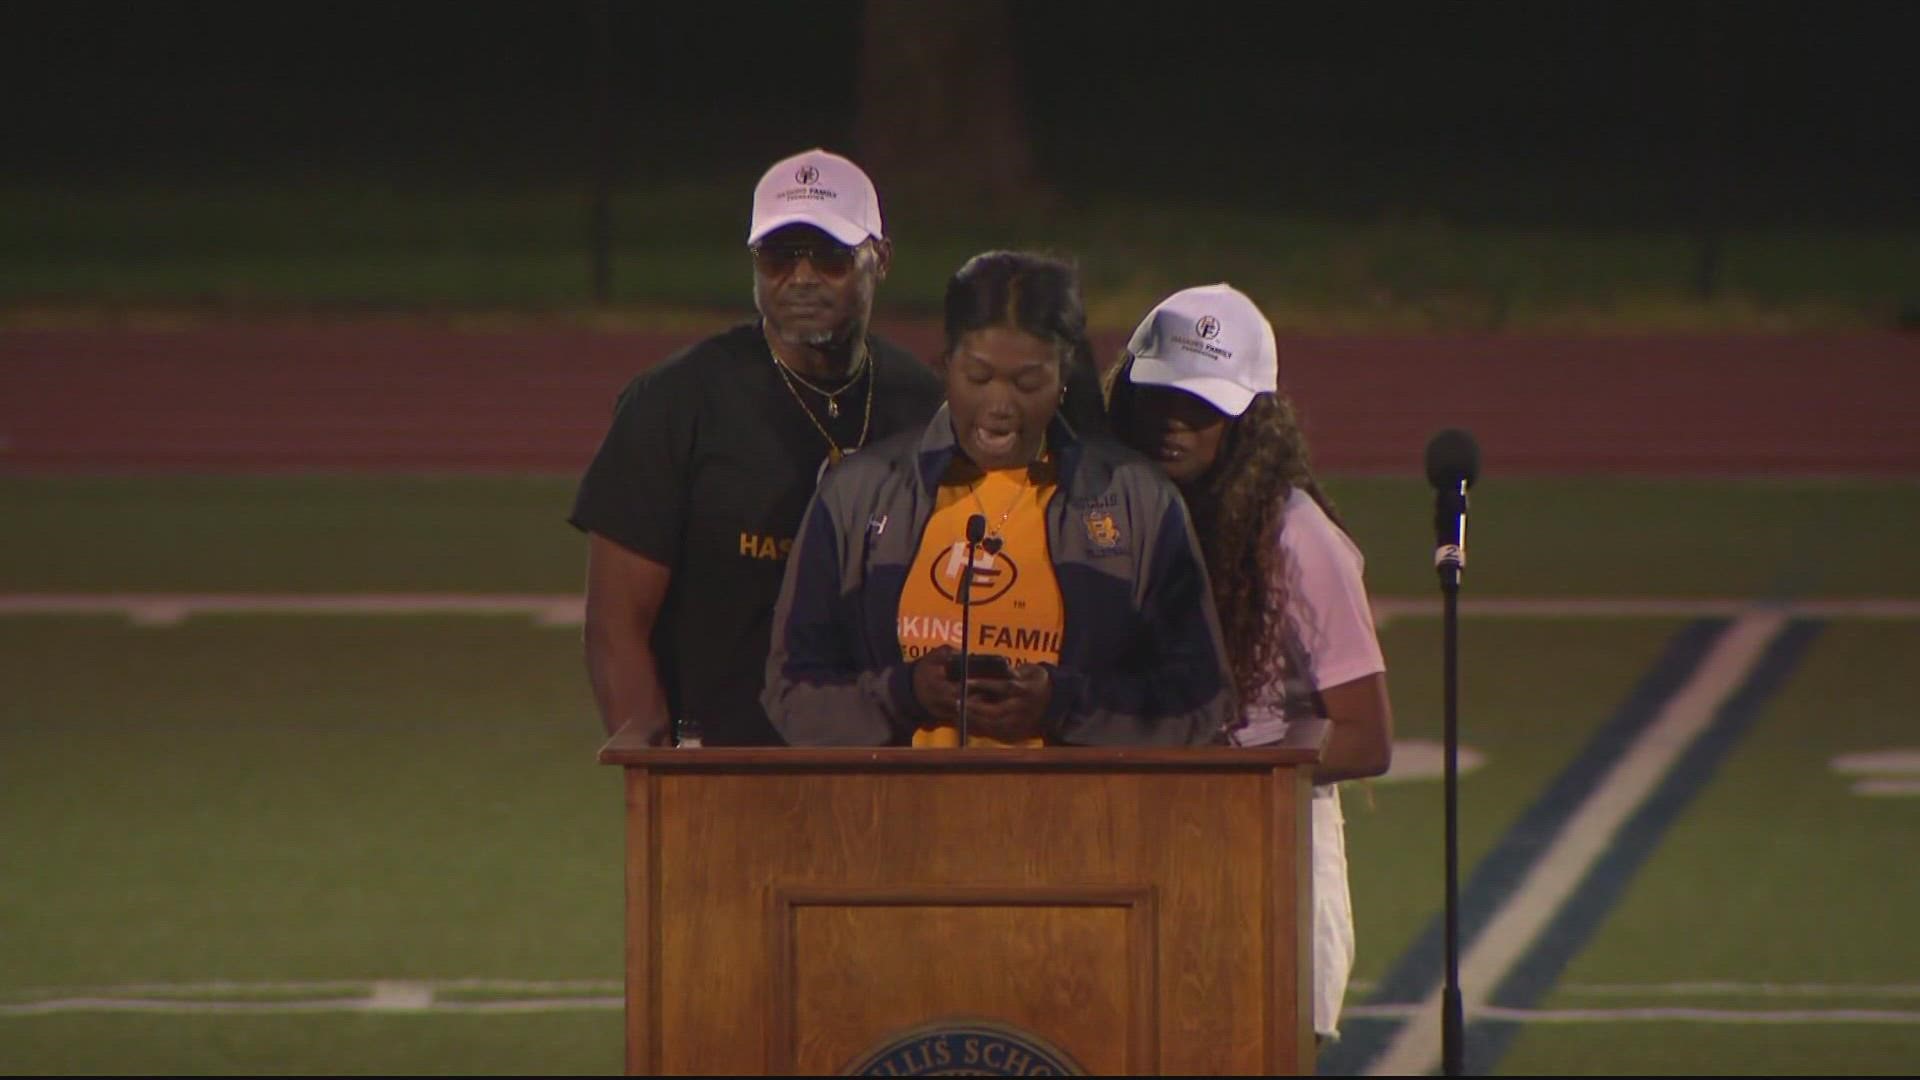 Tamia Haskins spoke at her brother's memorial in Potomac, MD. A contingent of NFL mourners led by Dan Snyder attended, with Ohio State Football Coach Ryan Day